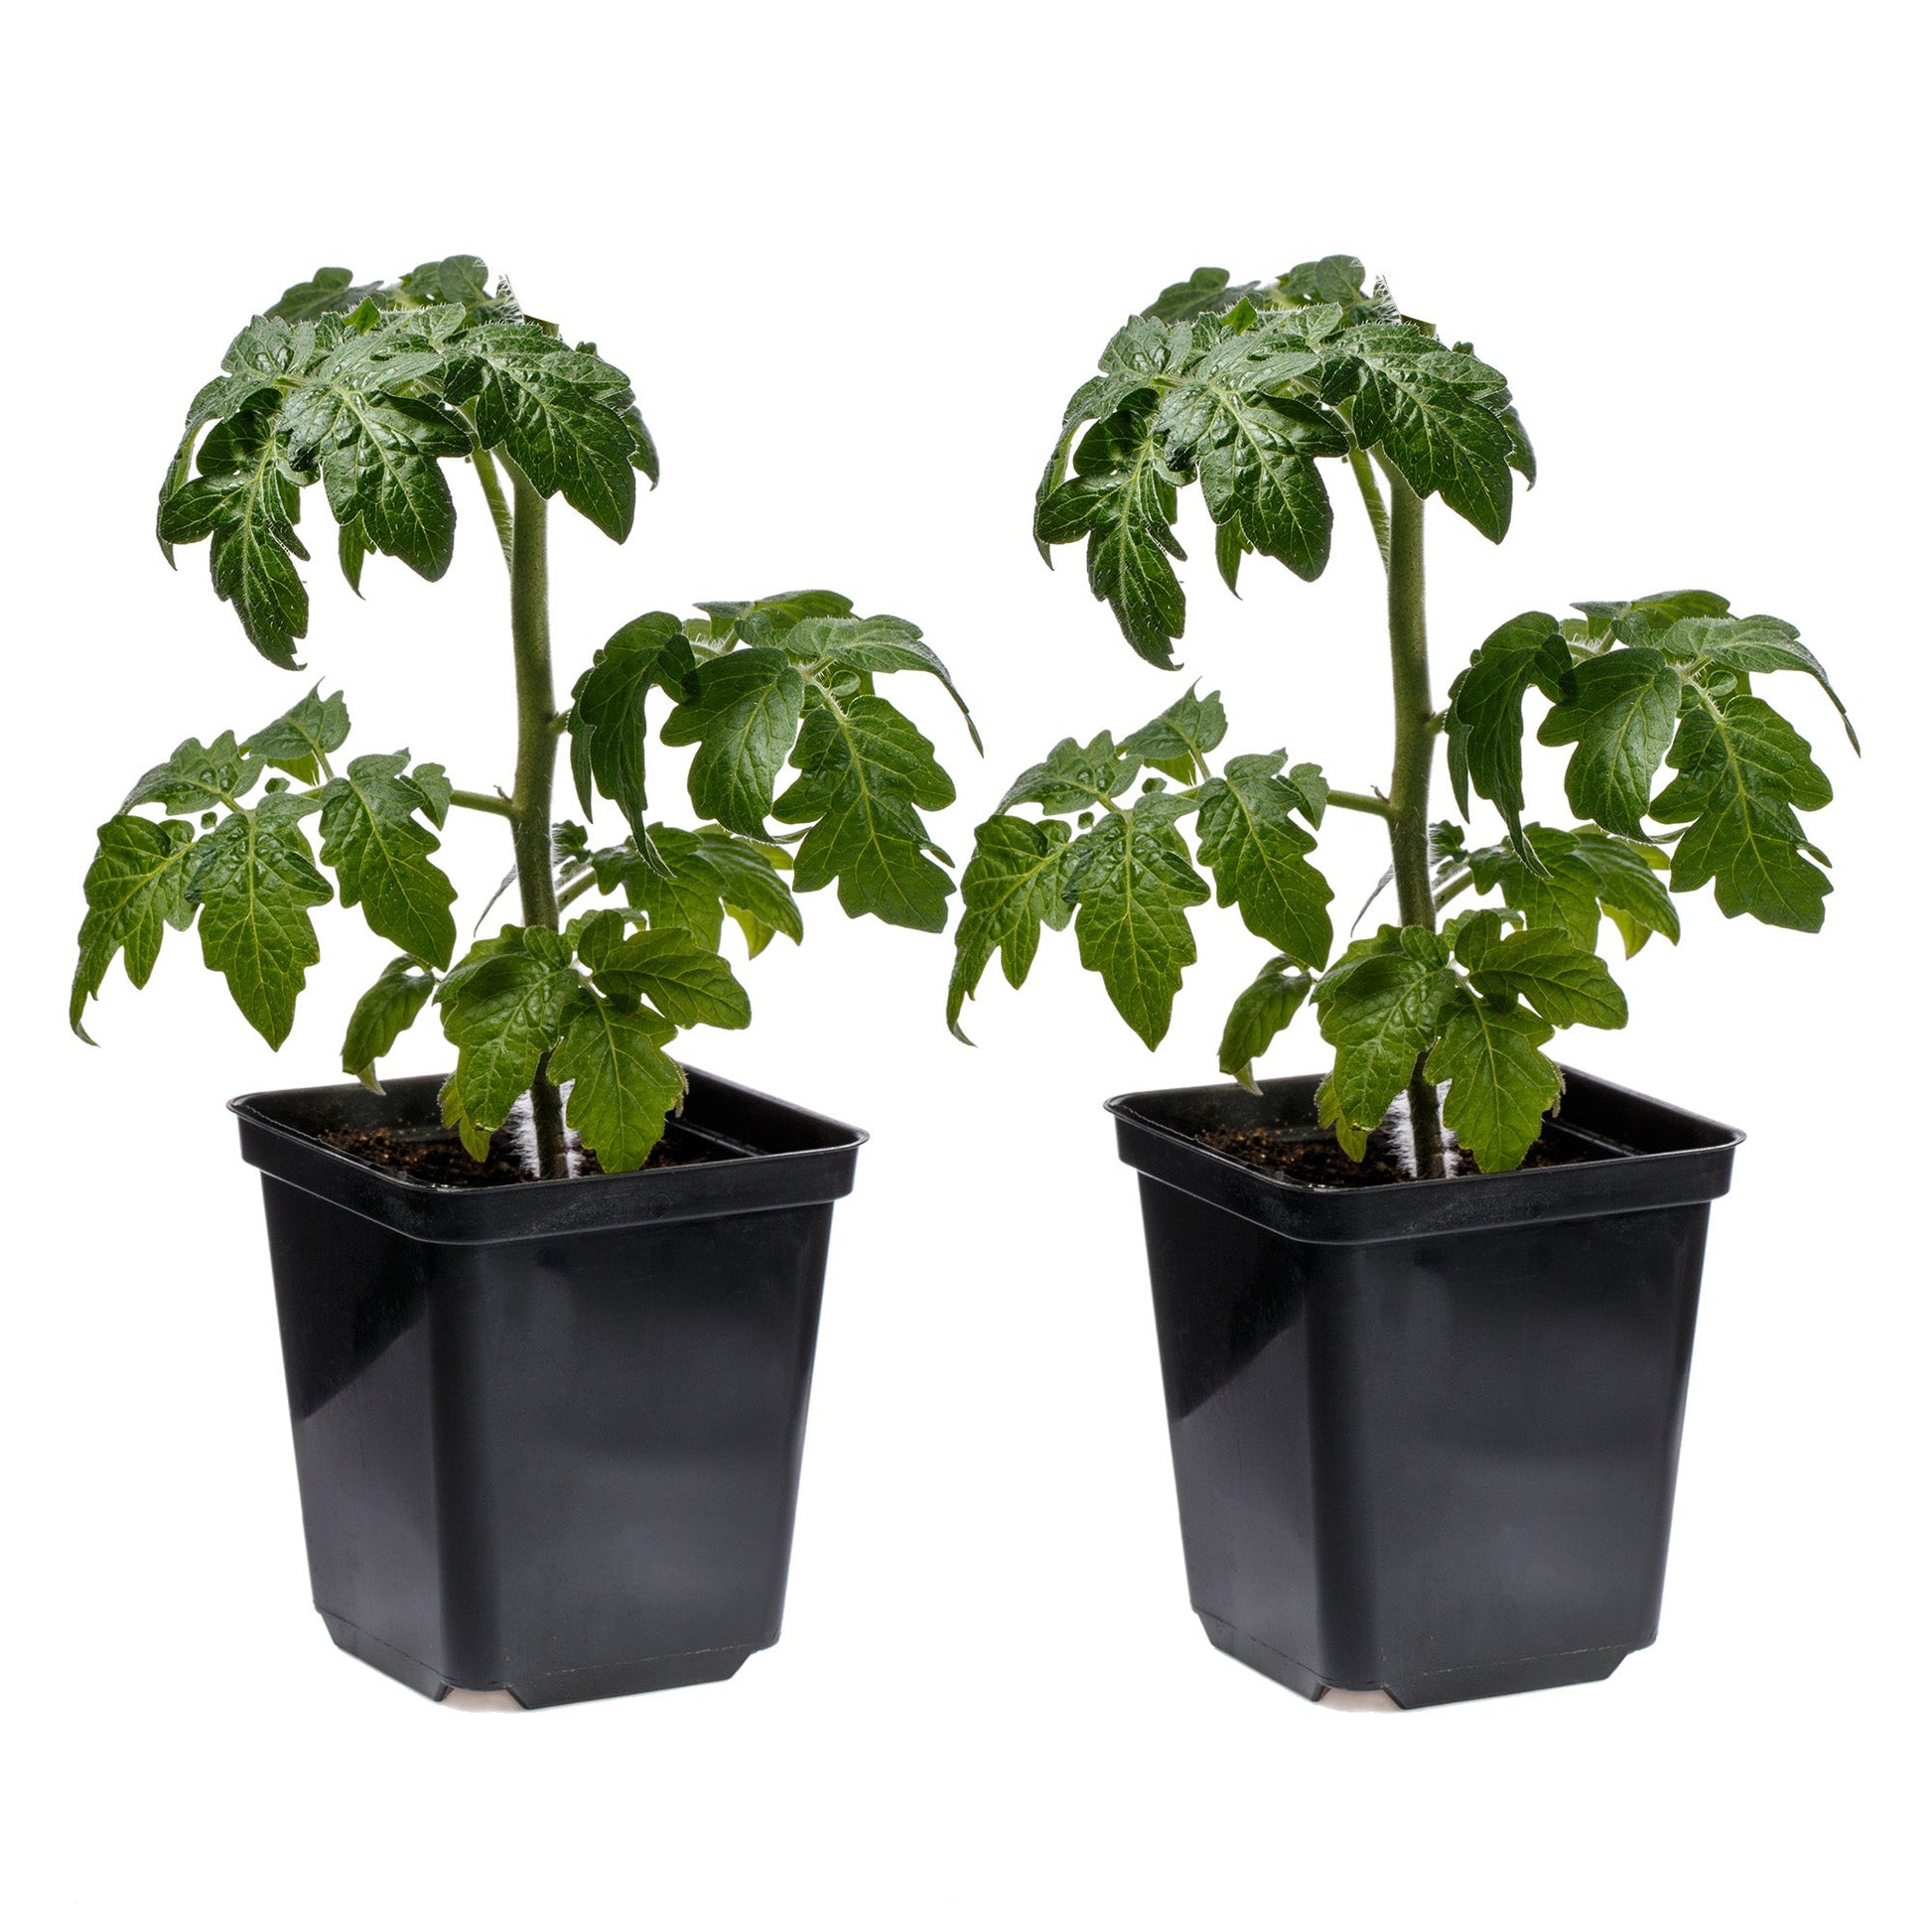 Supersweet 100 Cherry Tomato Live Plants (4-Pack) - SSKIT250